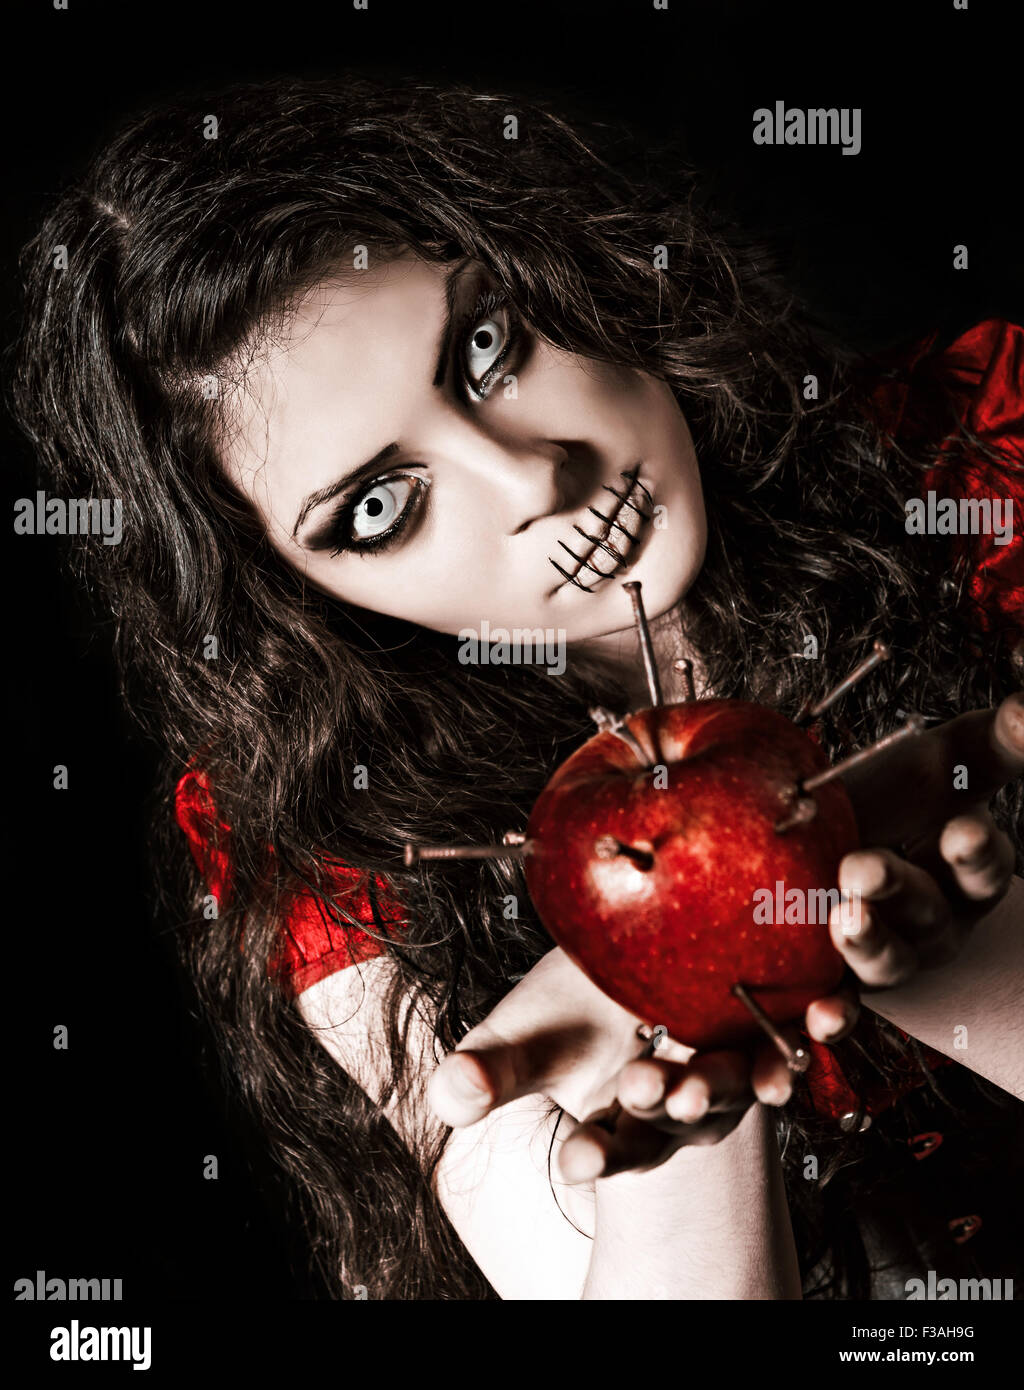 Horror shot: the strange scary girl with mouth sewn shut holds apple studded with nails Stock Photo